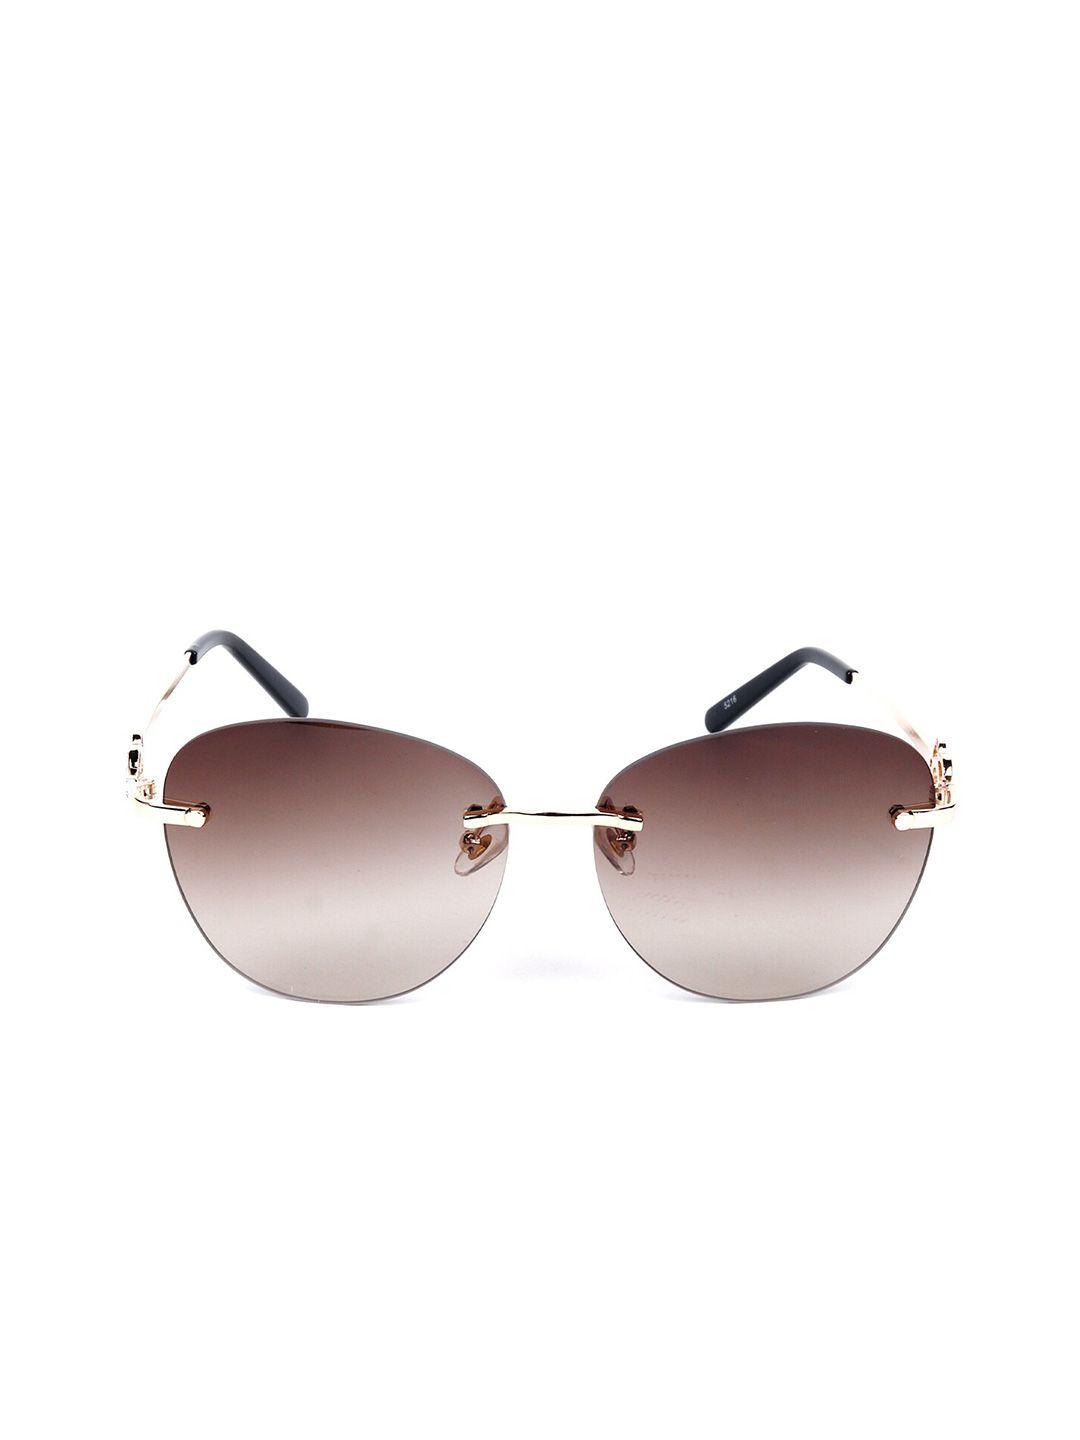 odette women brown lens & gold-toned oversized sunglasses with uv protected lens diw231-